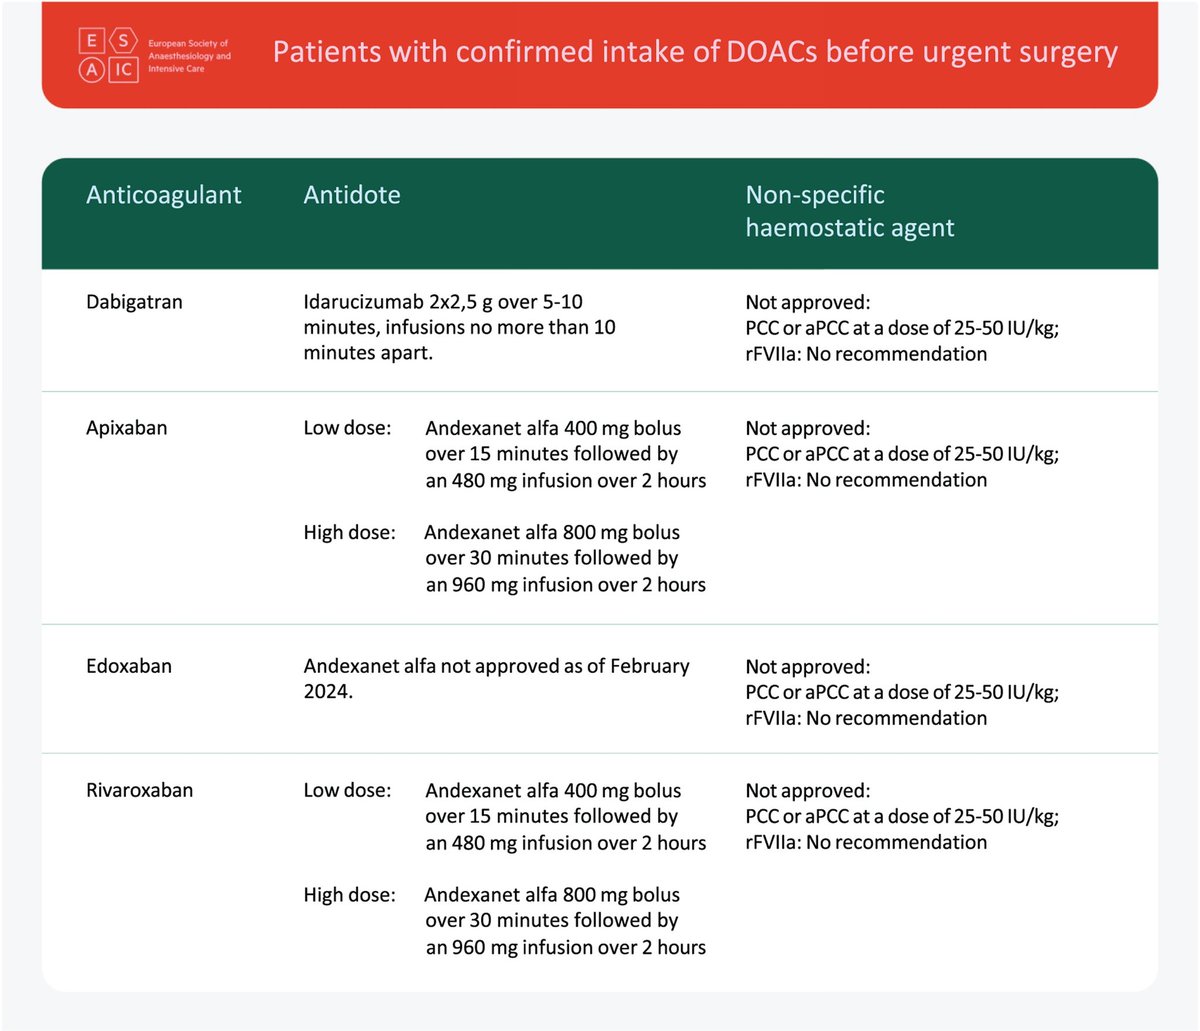 🔴 2024 Clinical guideline on reversal of direct oral anticoagulants in patients with life threatening bleeding  #openaccess 

journals.lww.com/ejanaesthesiol…
#Epeeps #CardioTwitter #EHRA2024
 #CardioEd #Cardiology #FOAMed #meded #MedEd #Cardiology #CardioTwitter #cardiotwitter